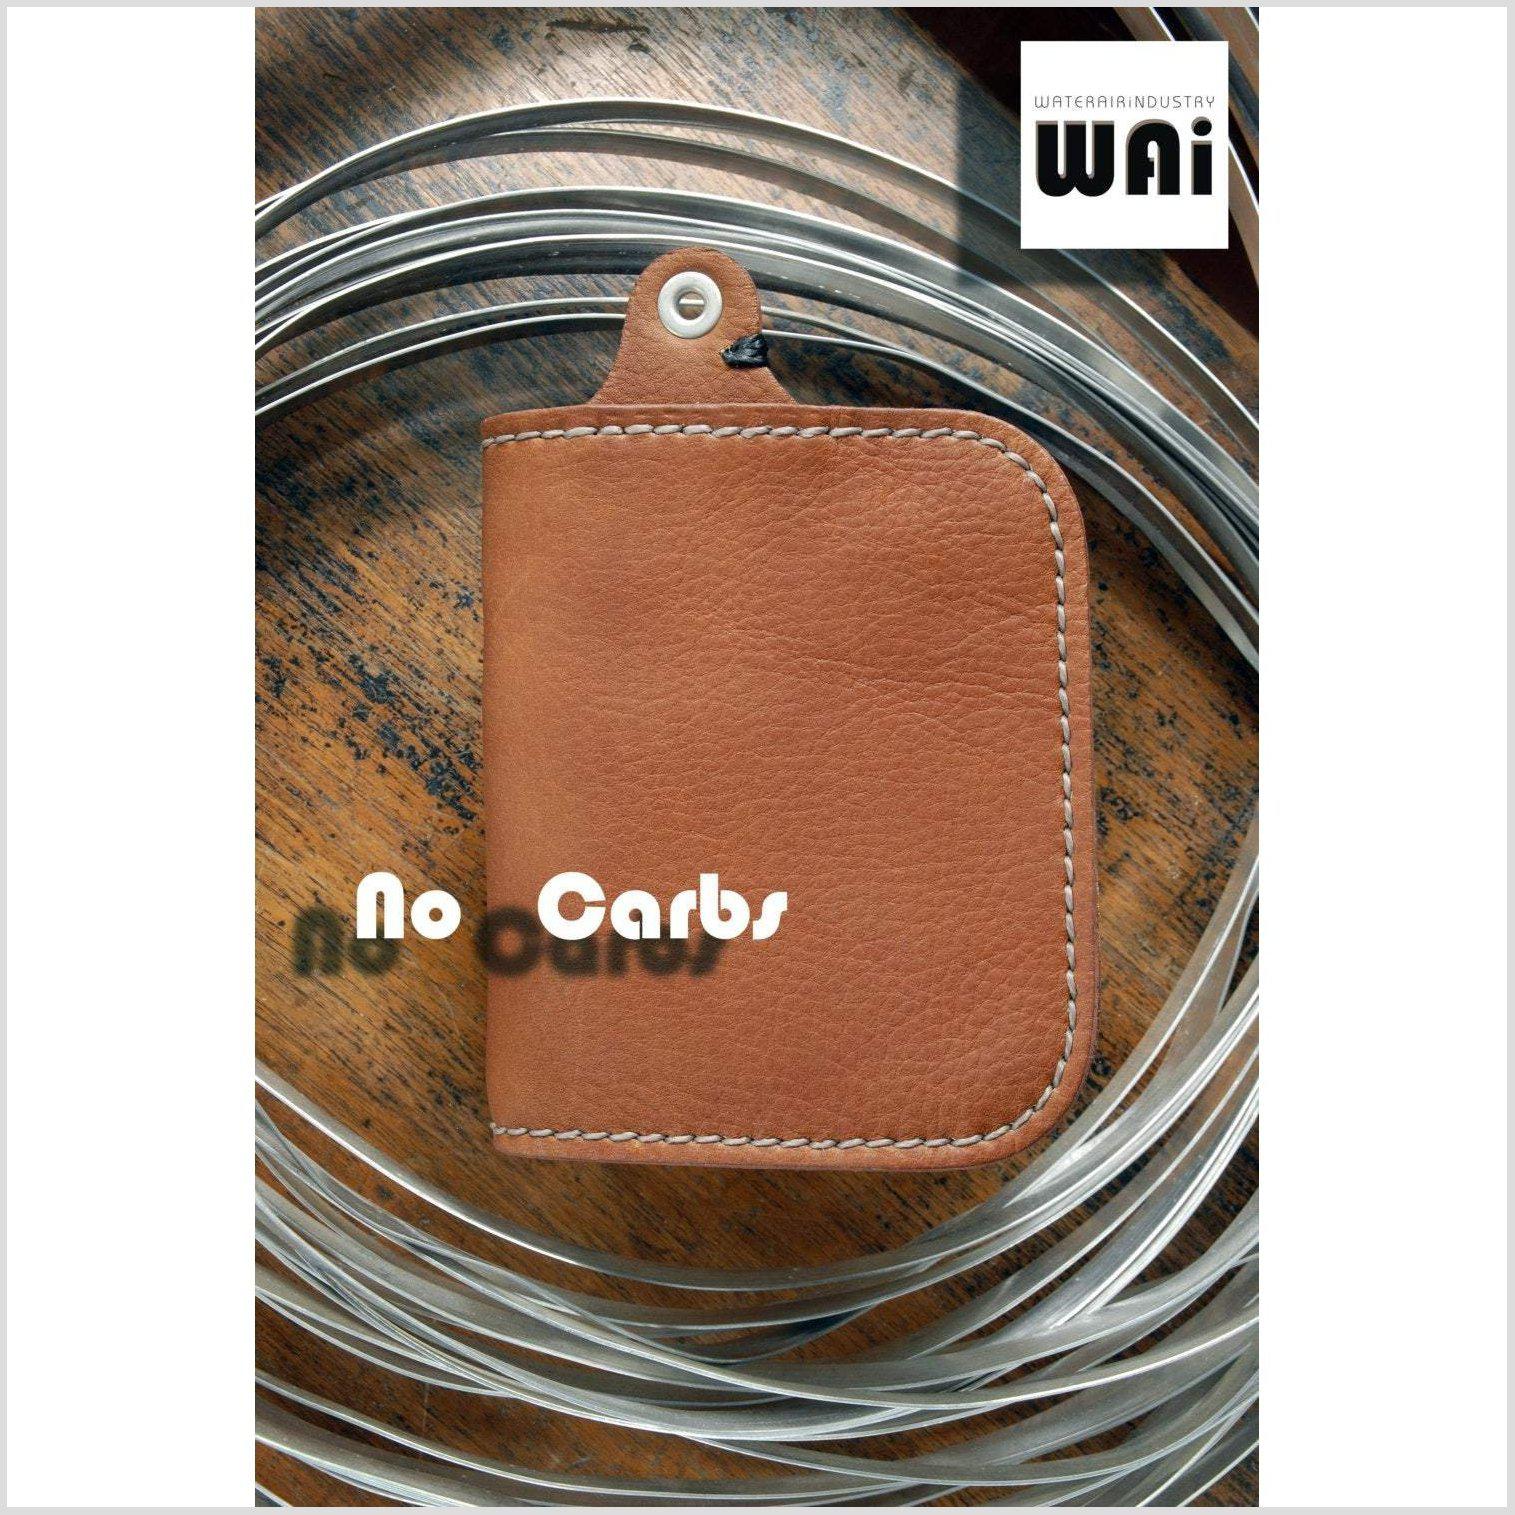 The Tanned Cow Super Slim Bifold Wallet Genuine Leather 